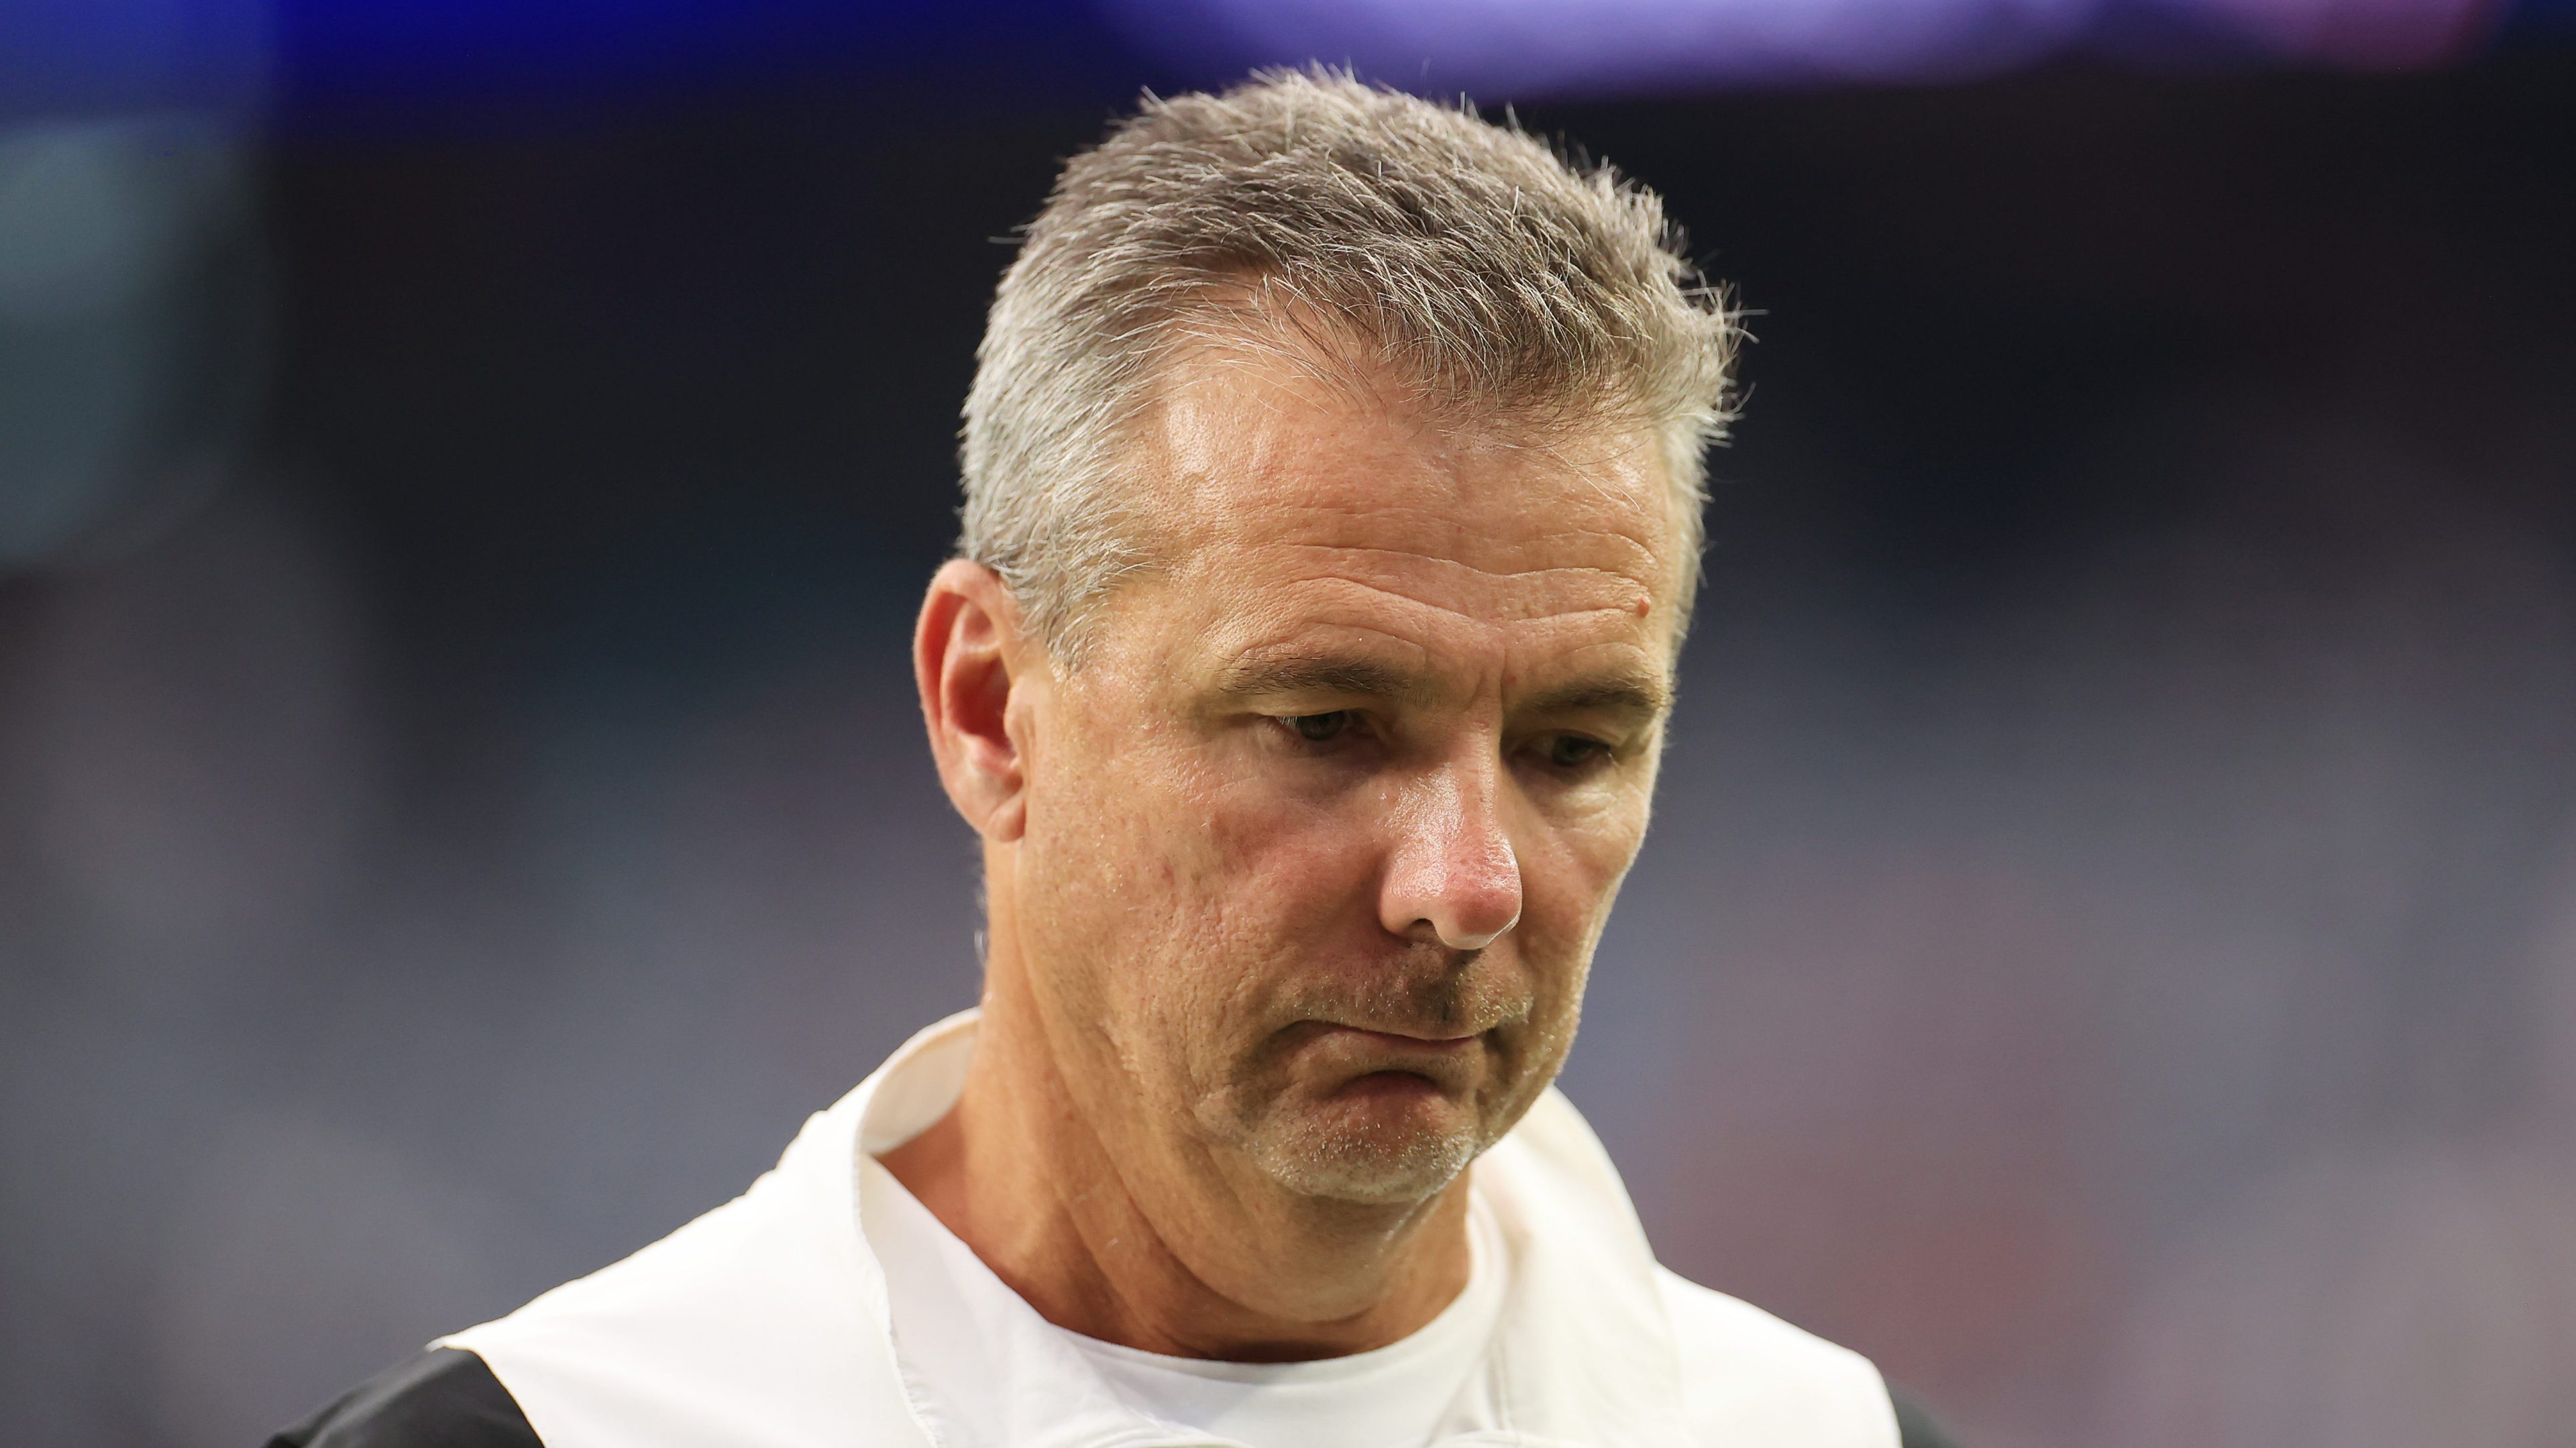 Then-head coach Urban Meyer of the Jacksonville Jaguars reacts after losing to the Houston Texans 37-21 at NRG Stadium on September 12, 2021 in Houston, Texas.